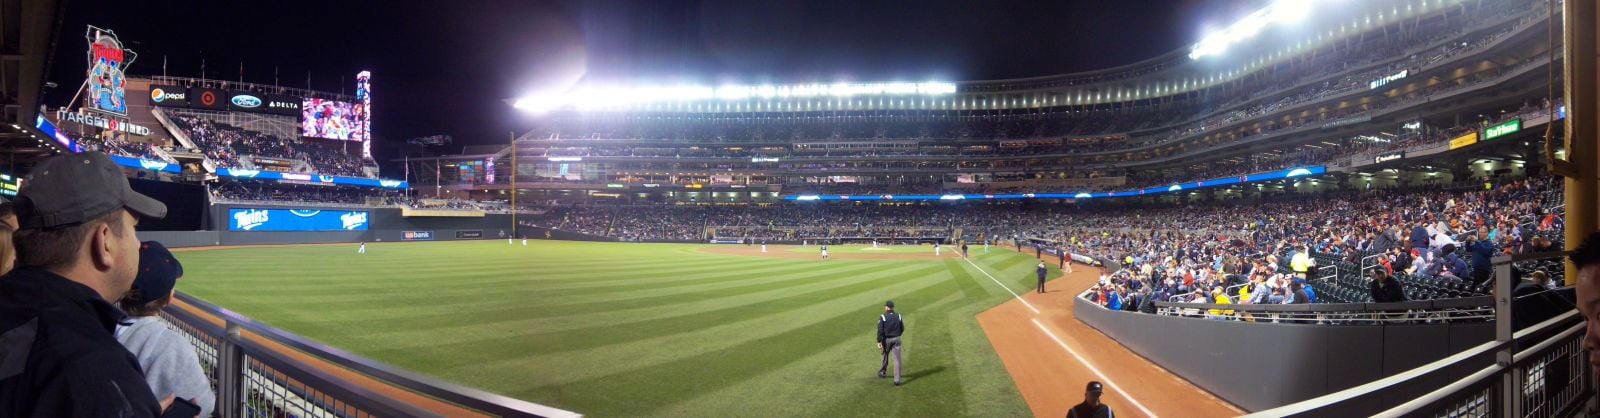 section 128, row 1 seat view  - target field